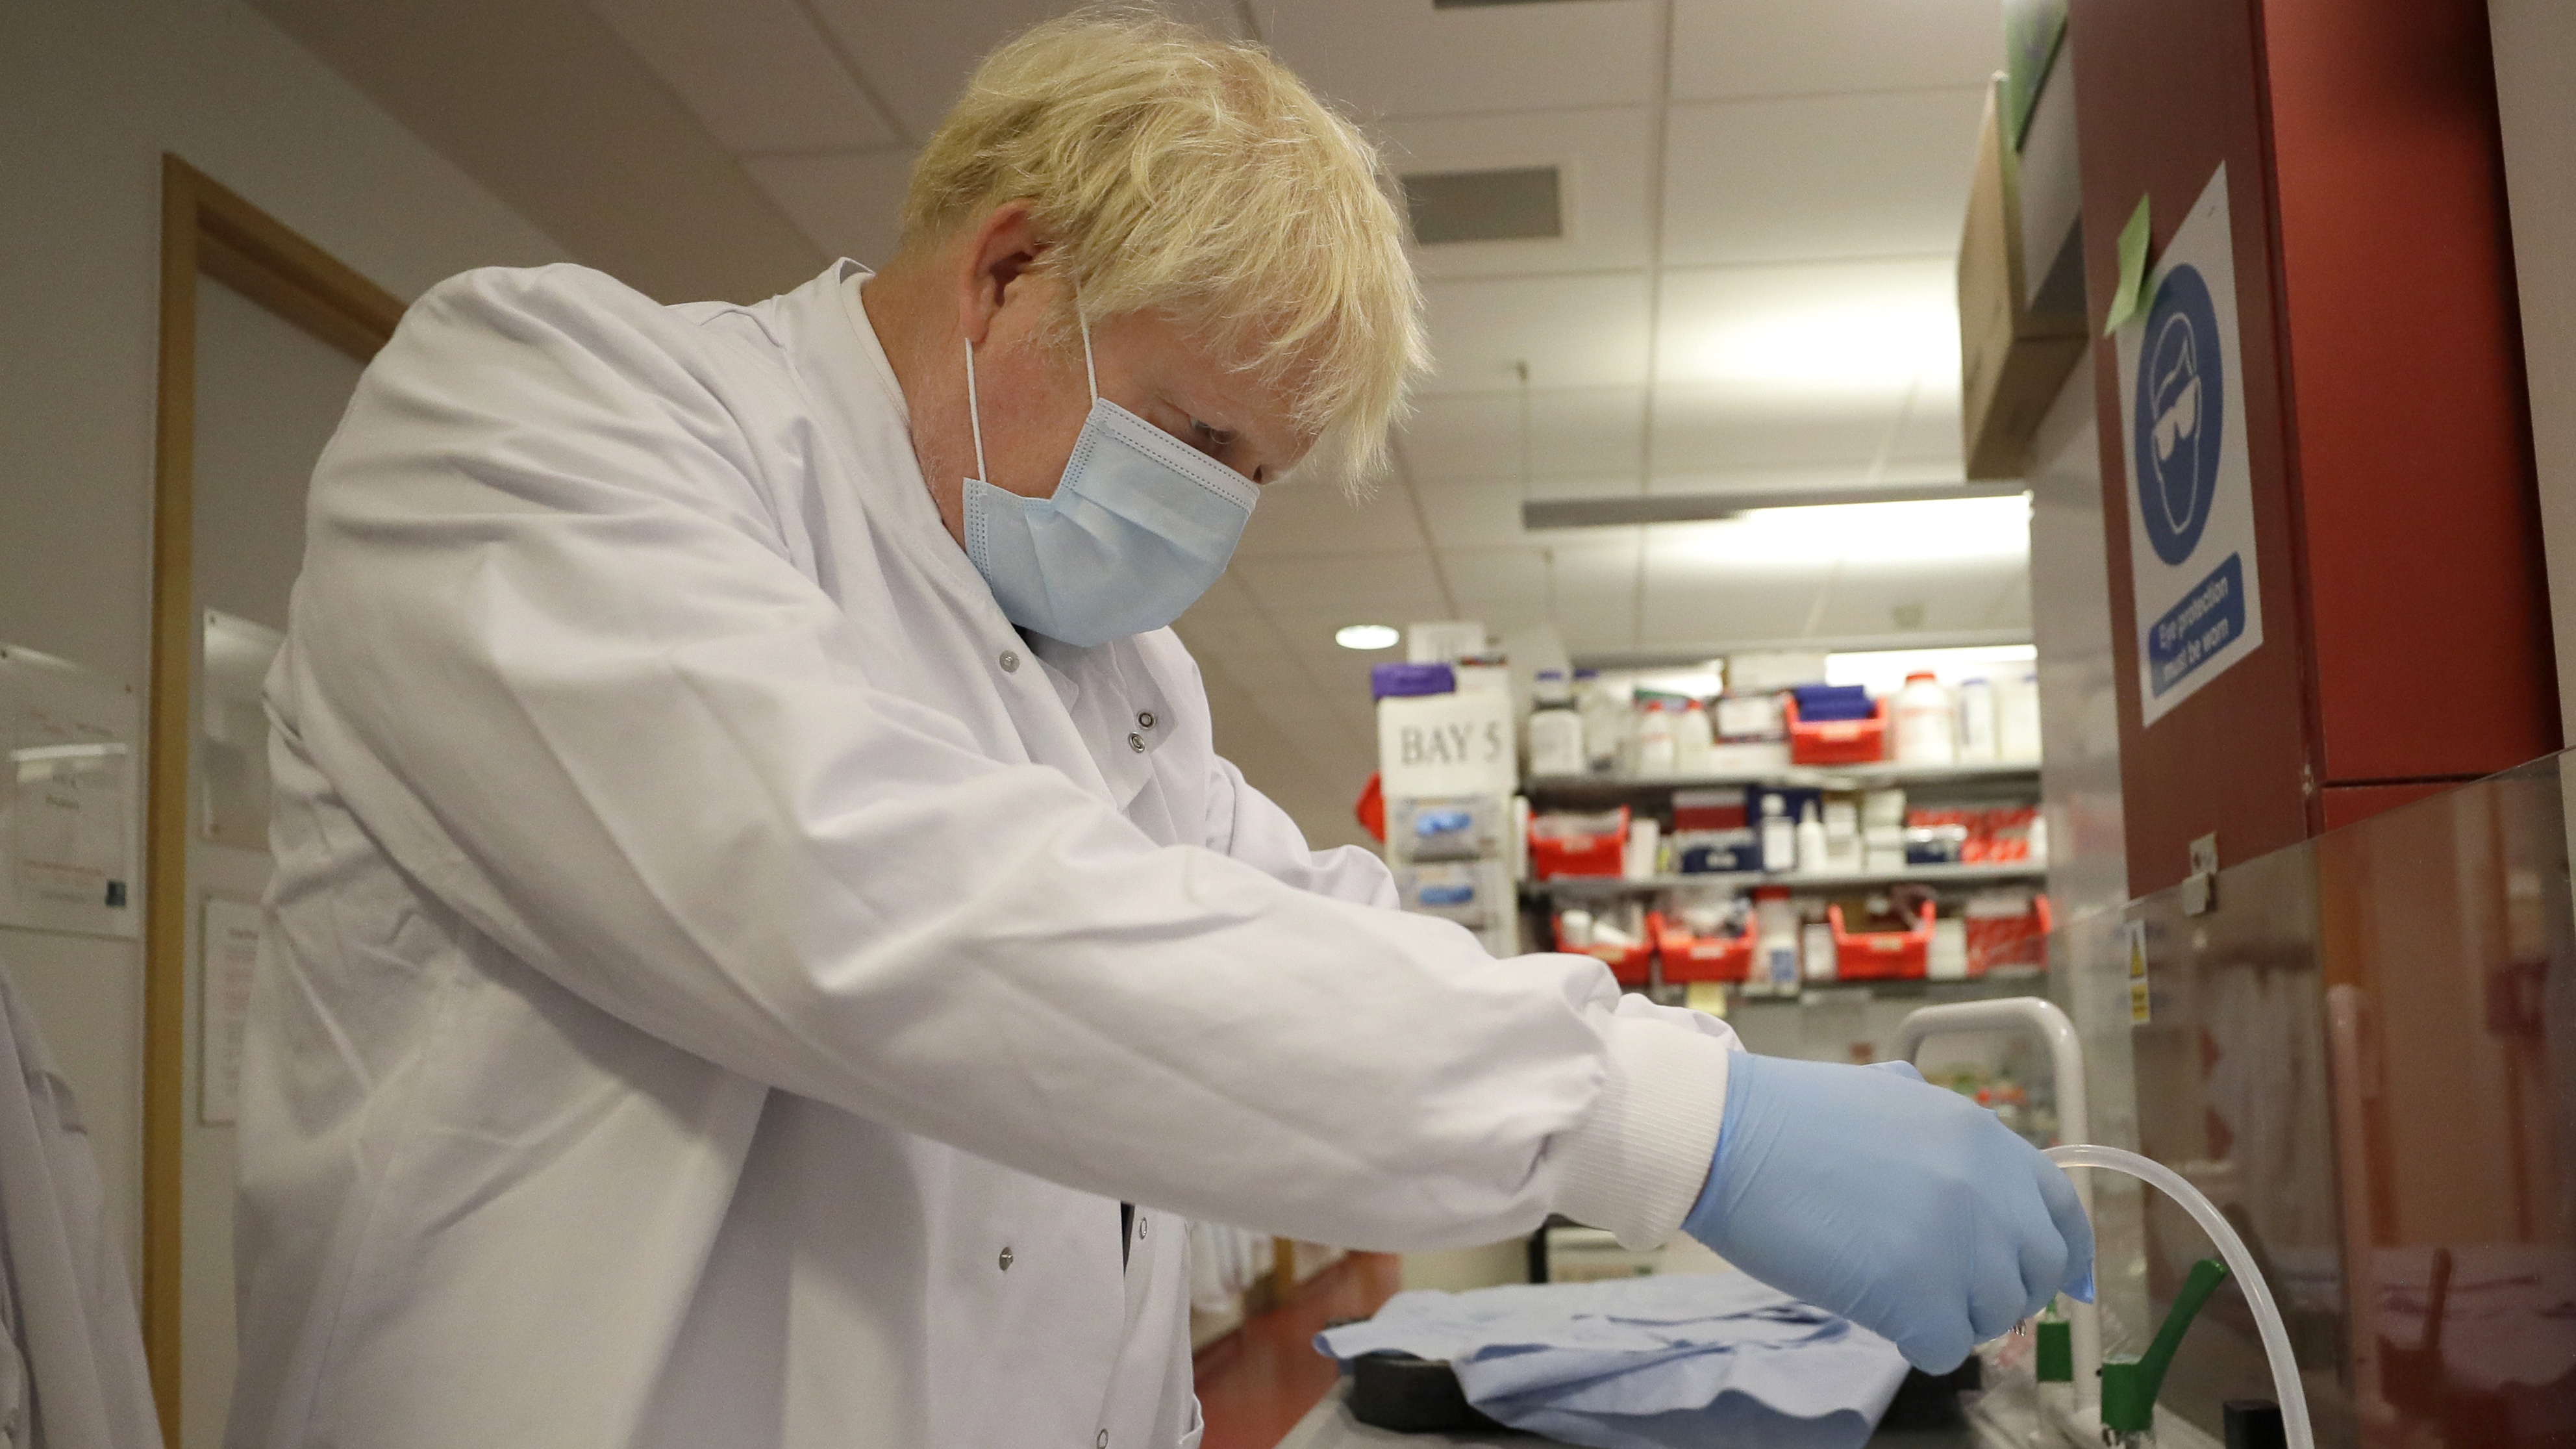 Boris Johnson washes immunological assays during a visit to the Jenner Institute.